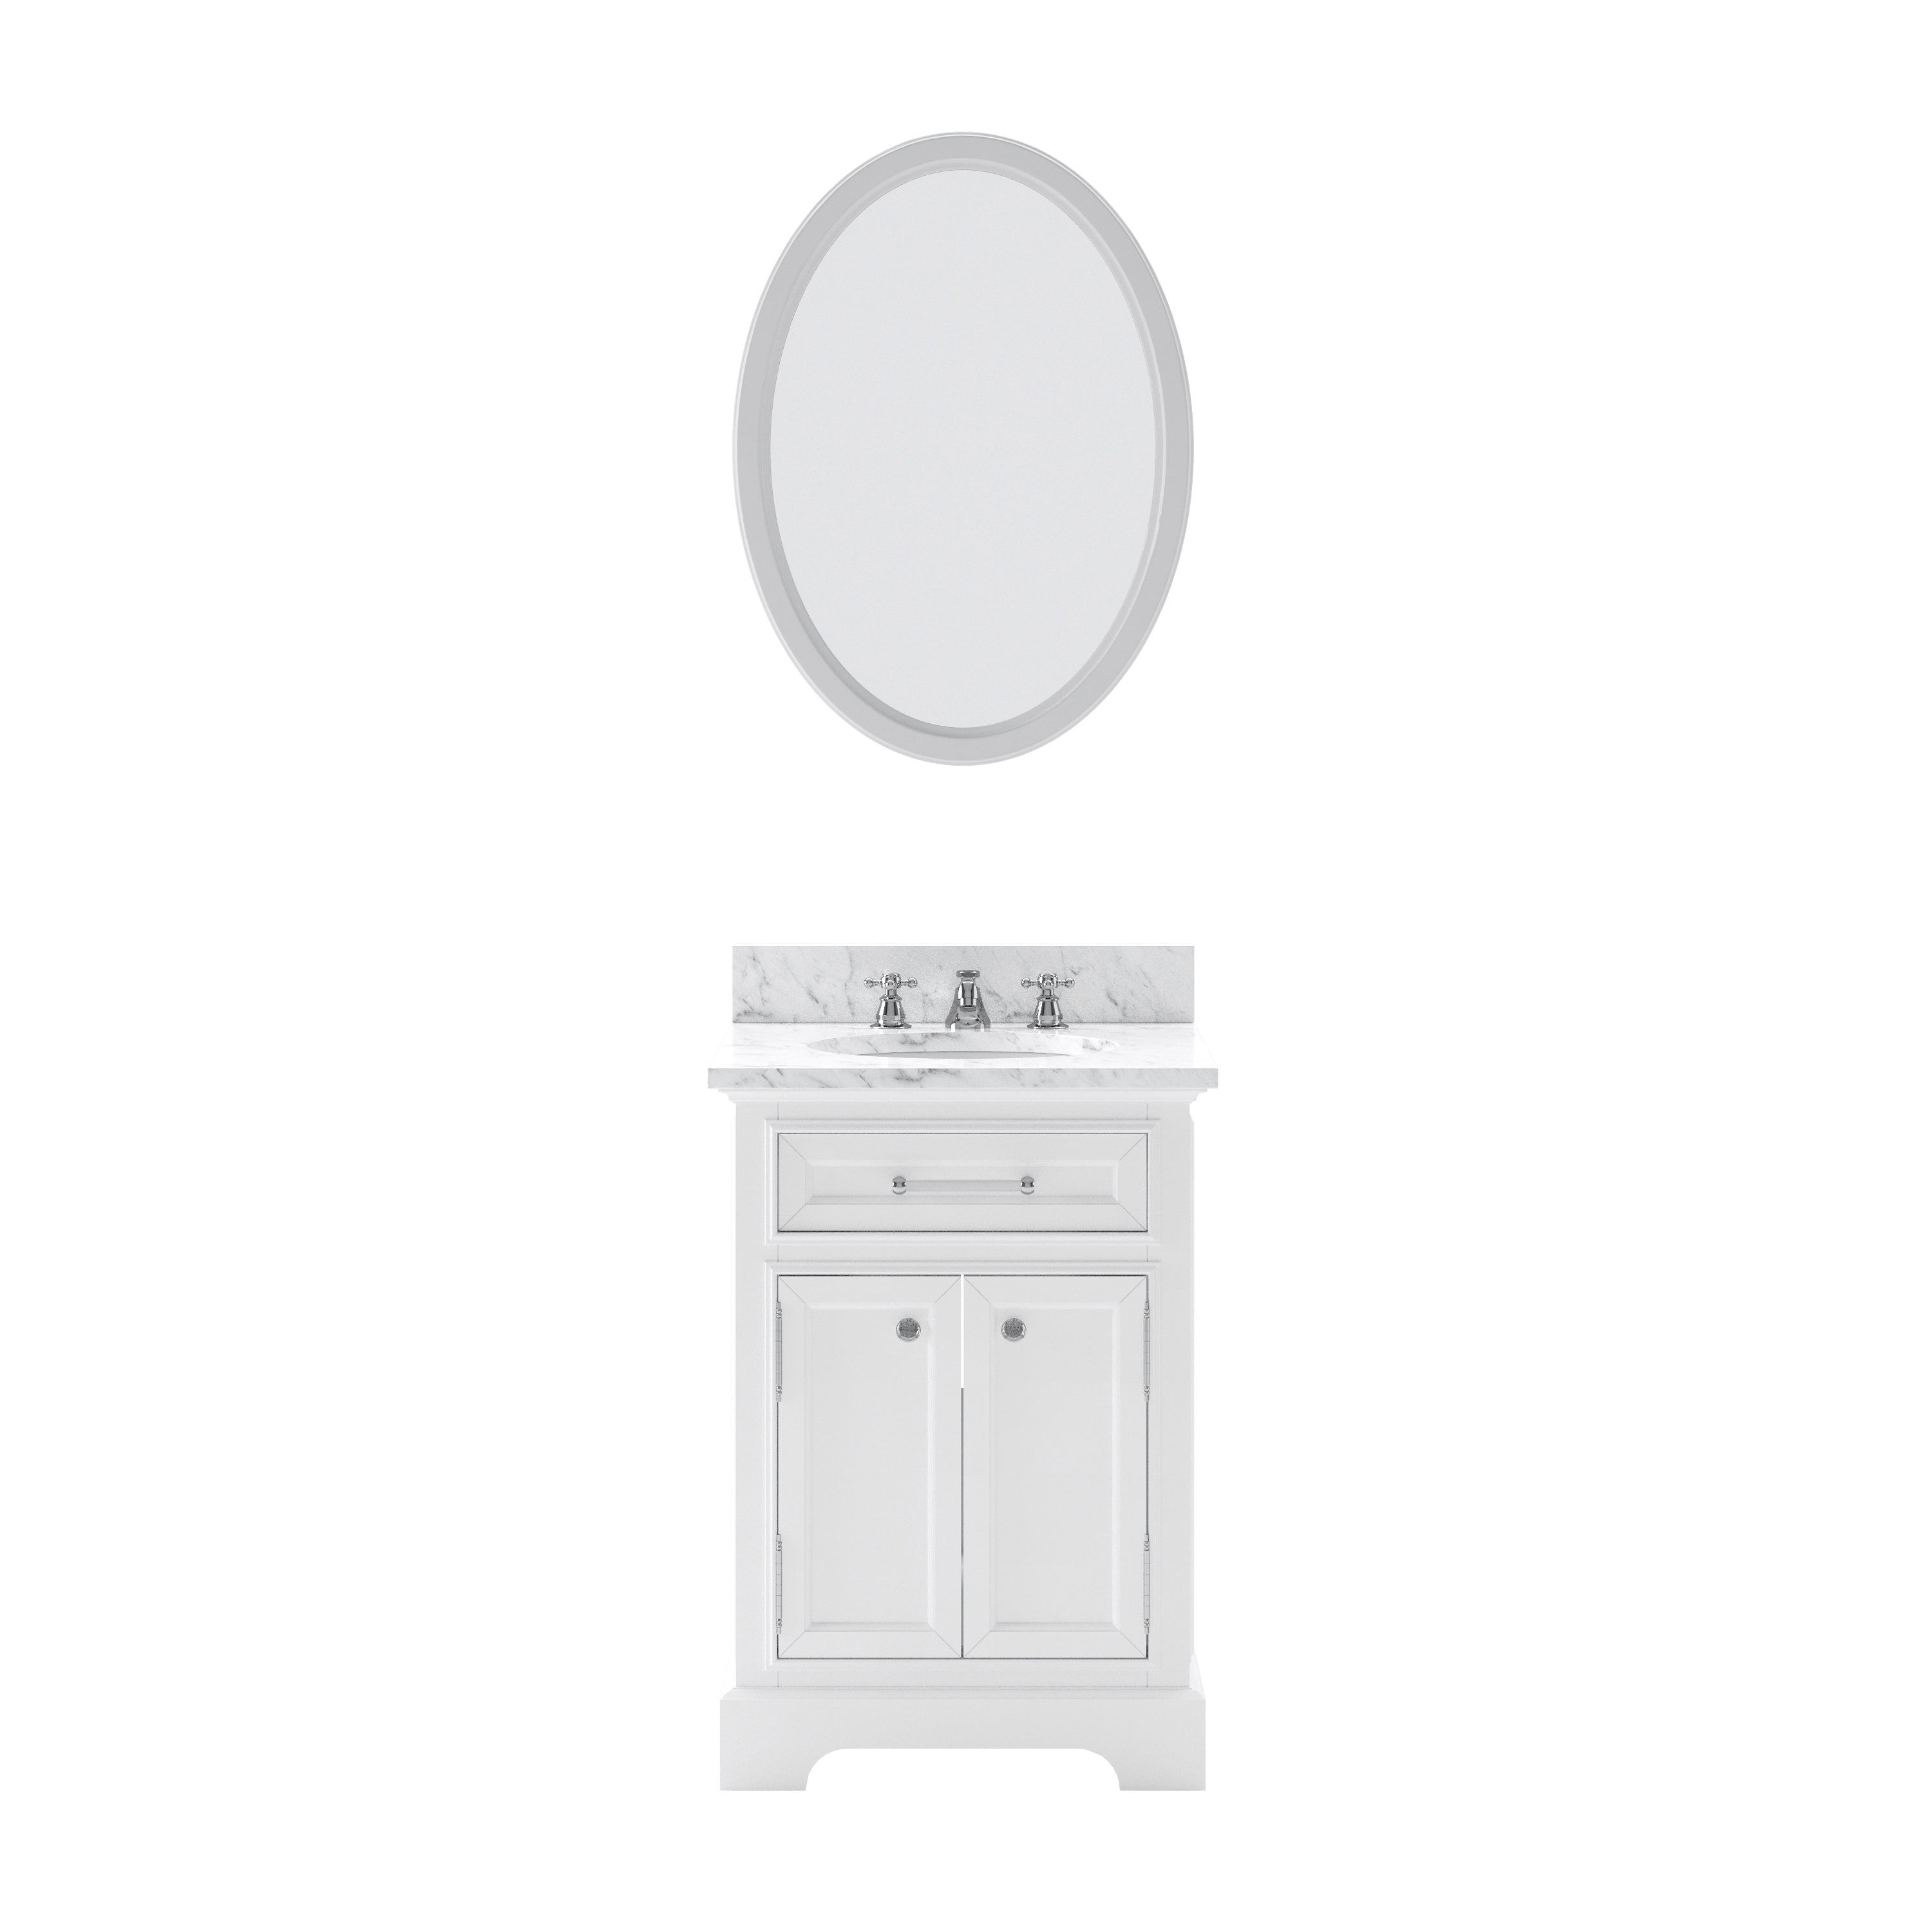 Water Creation | 24 Inch Pure White Single Sink Bathroom Vanity With Matching Framed Mirror And Faucet From The Derby Collection | DE24CW01PW-O21BX0901